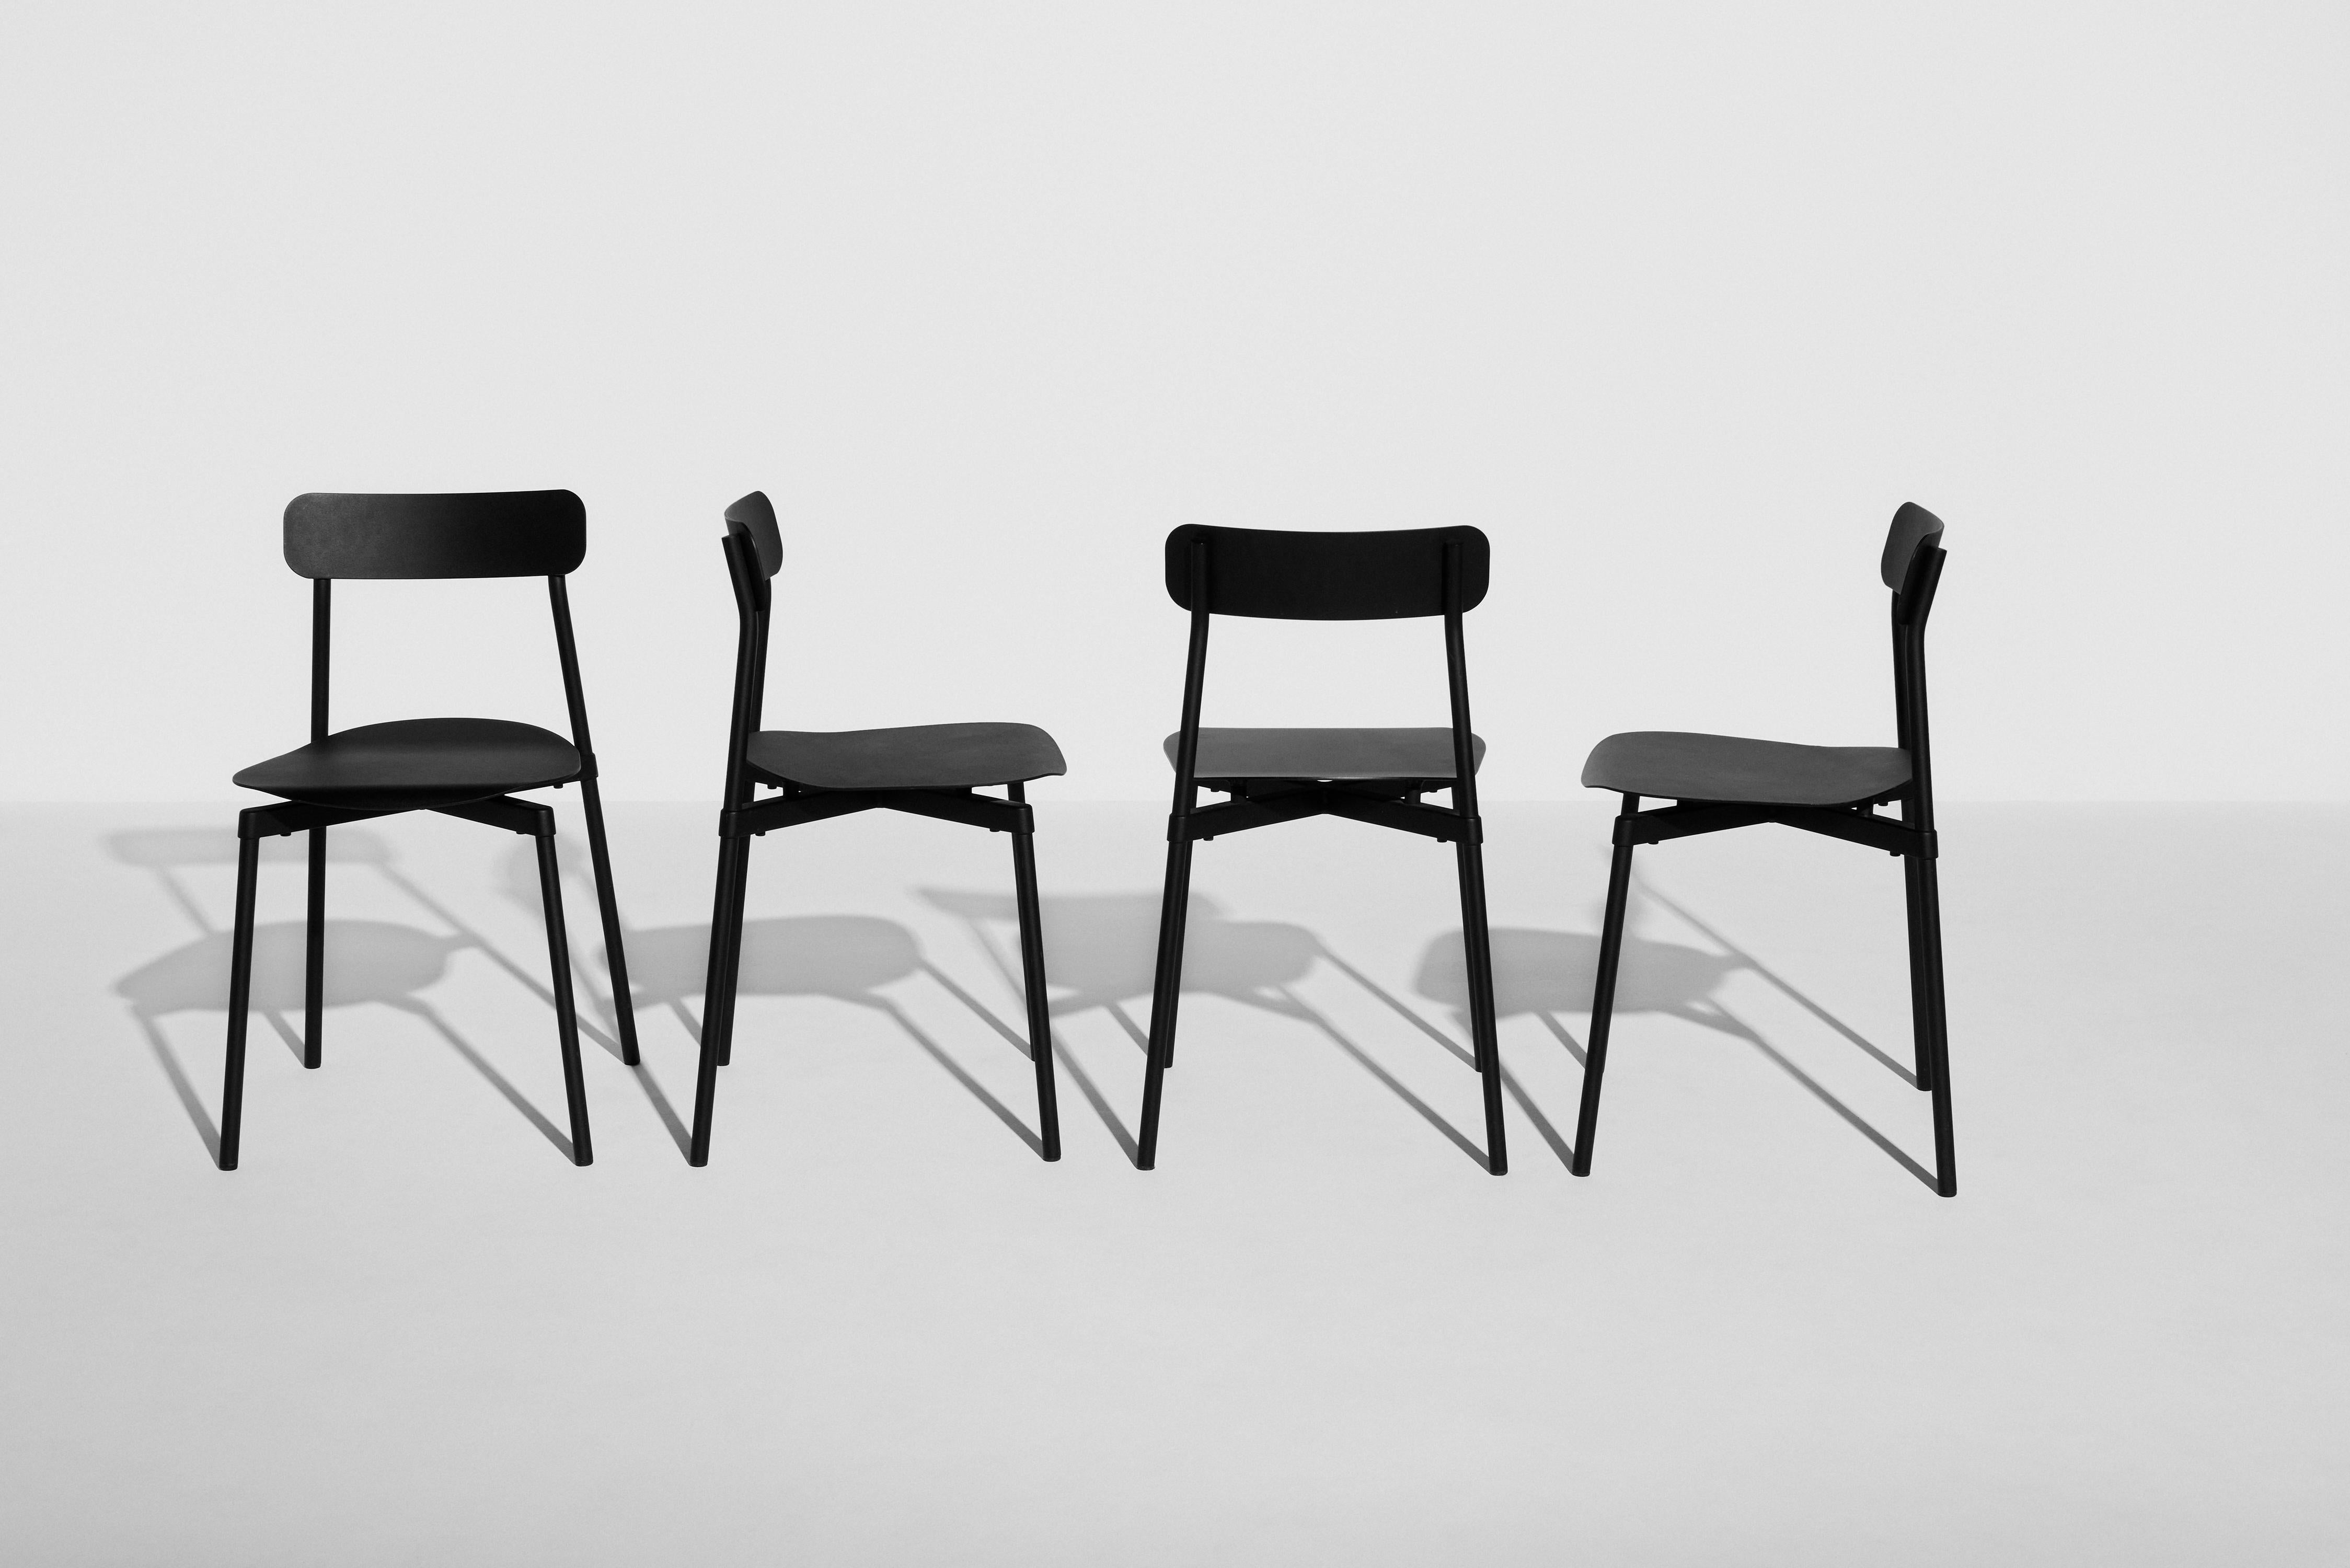 Petite Friture Fromme Chair in Black Aluminium by Tom Chung, 2019 For Sale 7